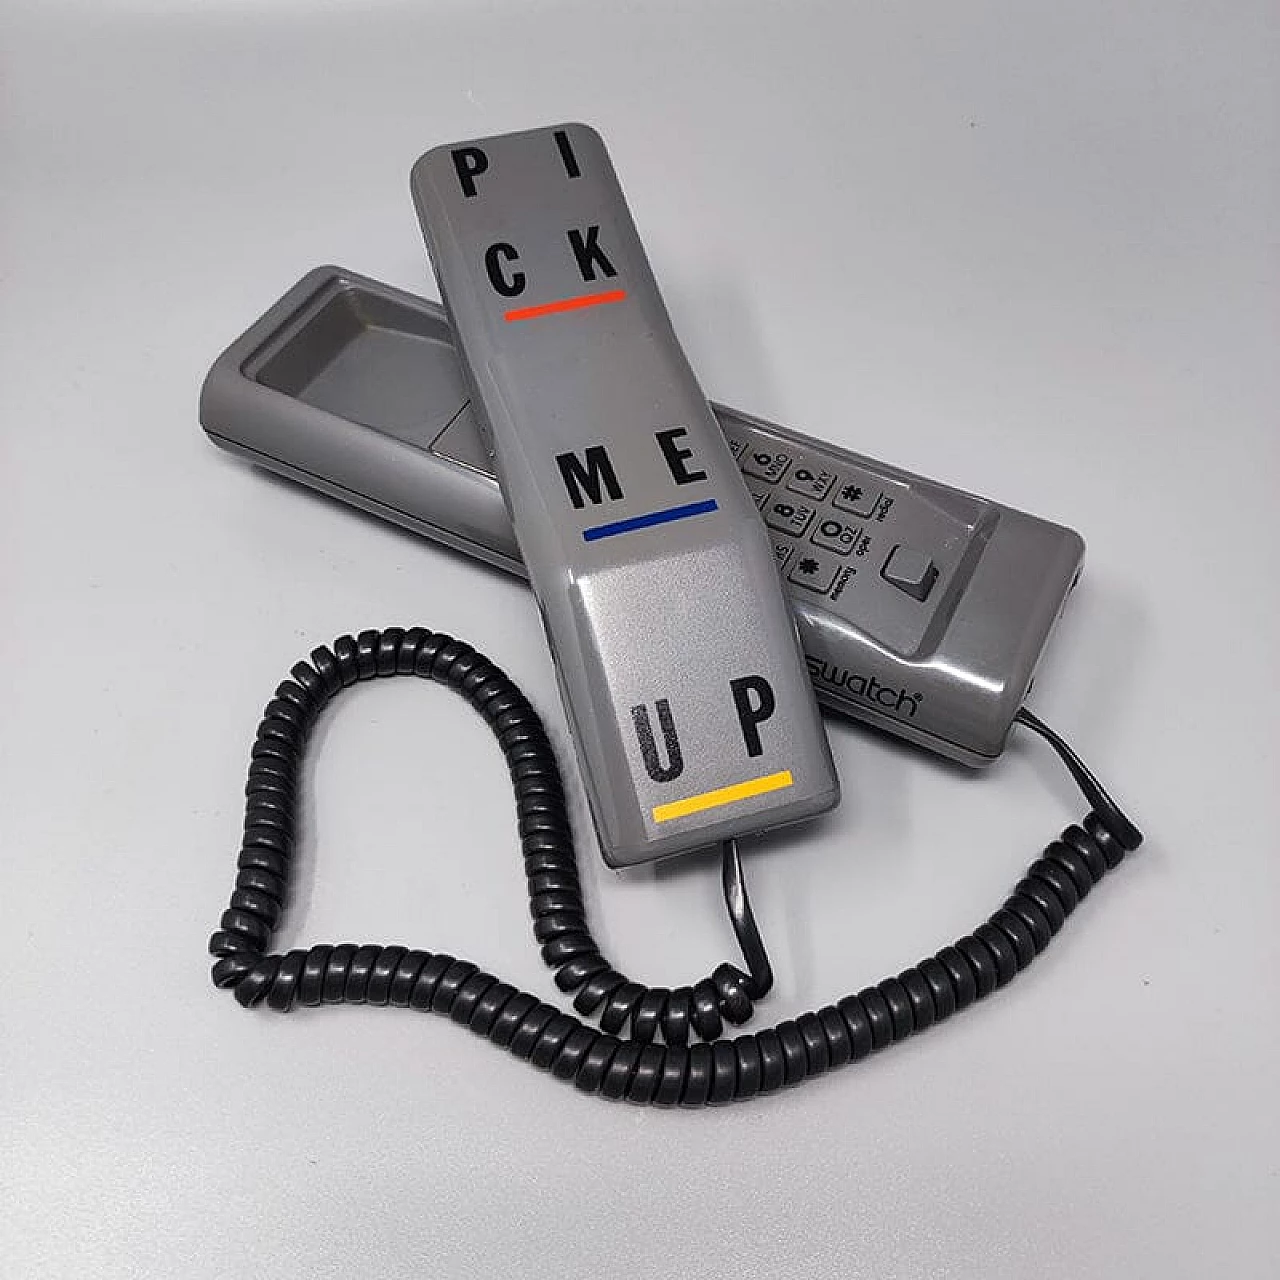 Pick Me Up telephone by Swatch, 1980s 6